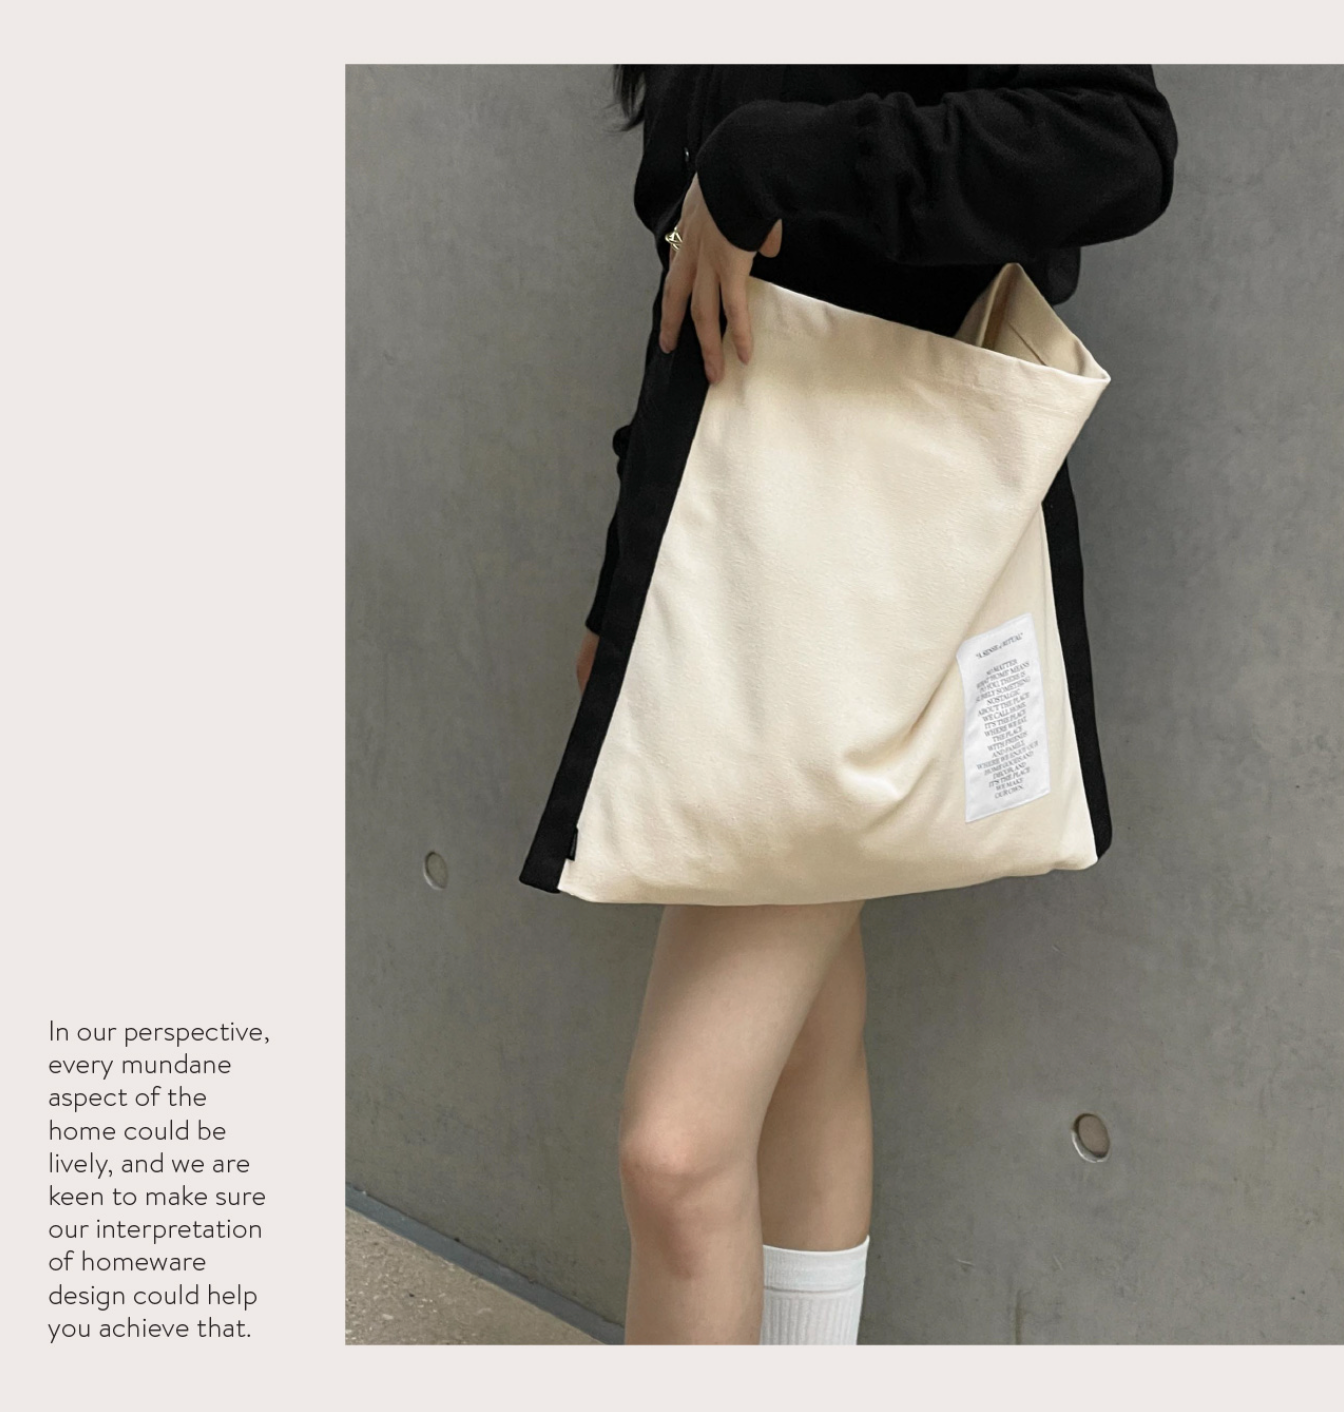 Voyage creamy color canvas crossbody high capacity tote bag, by A Bit Sleepy homedecor concept store